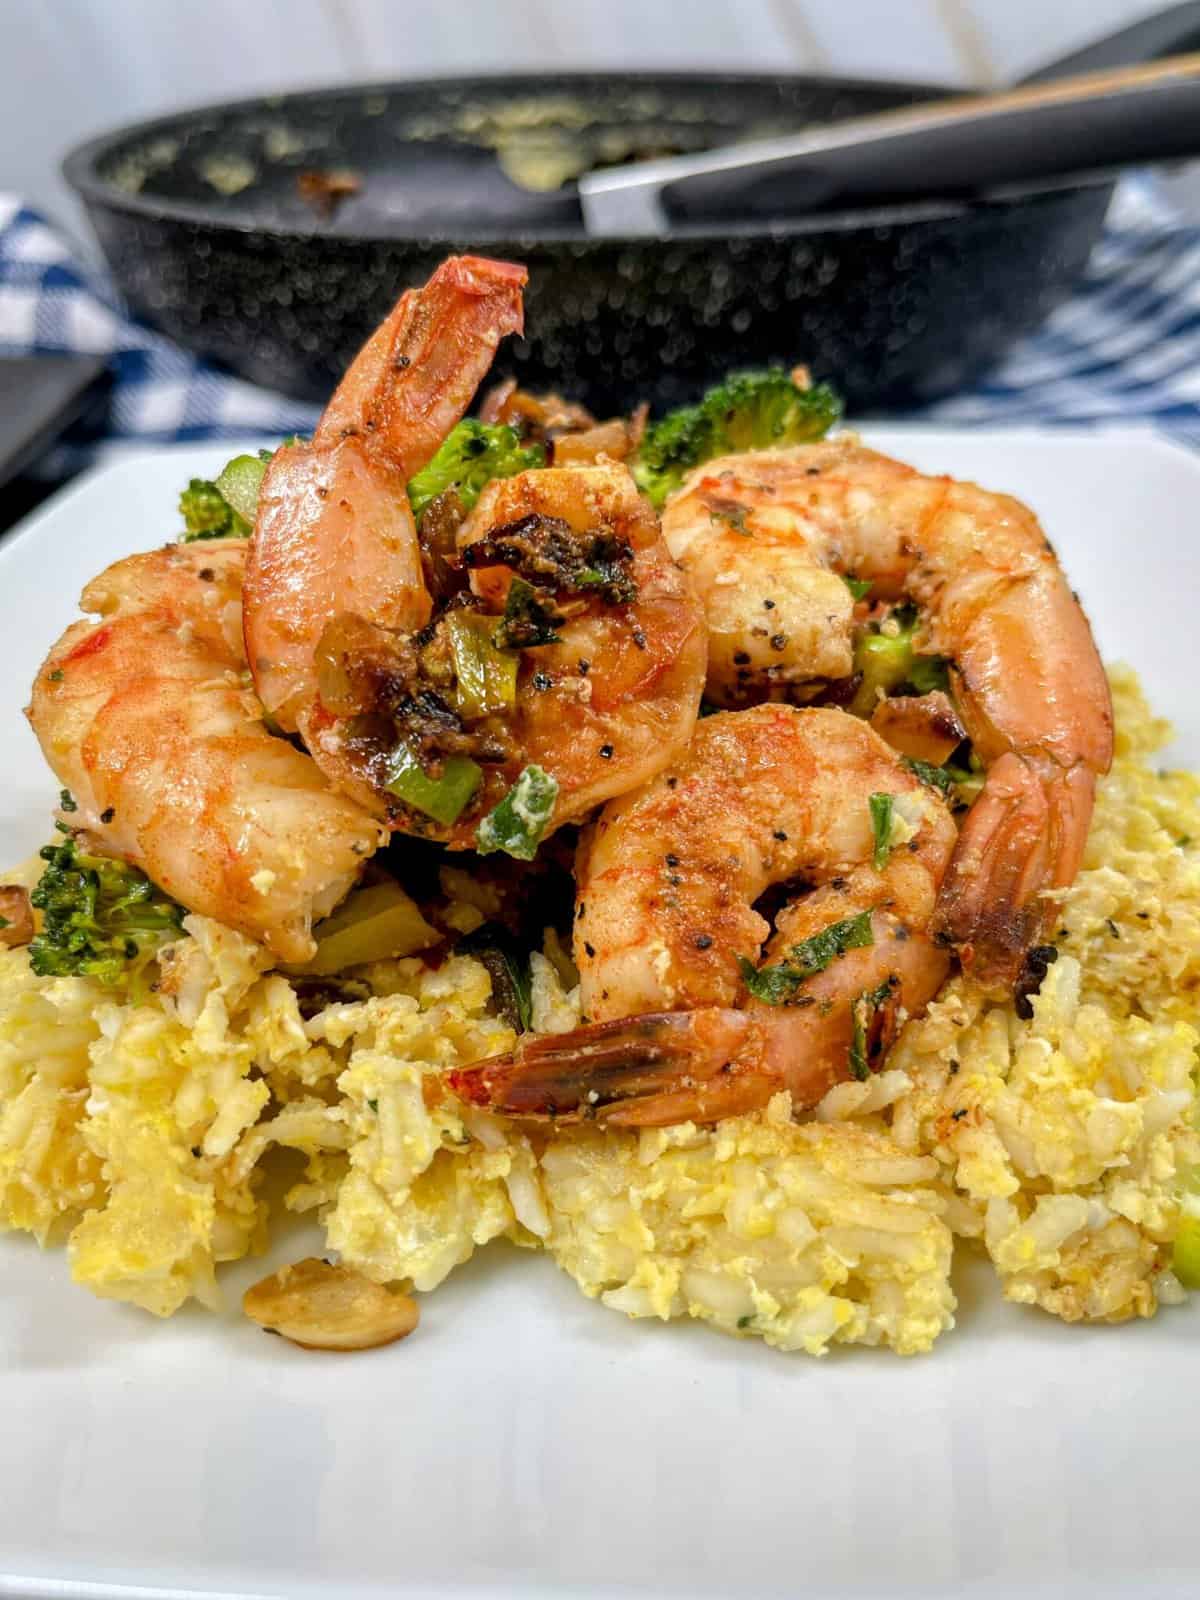 Delicious plate of shrimp fried rice